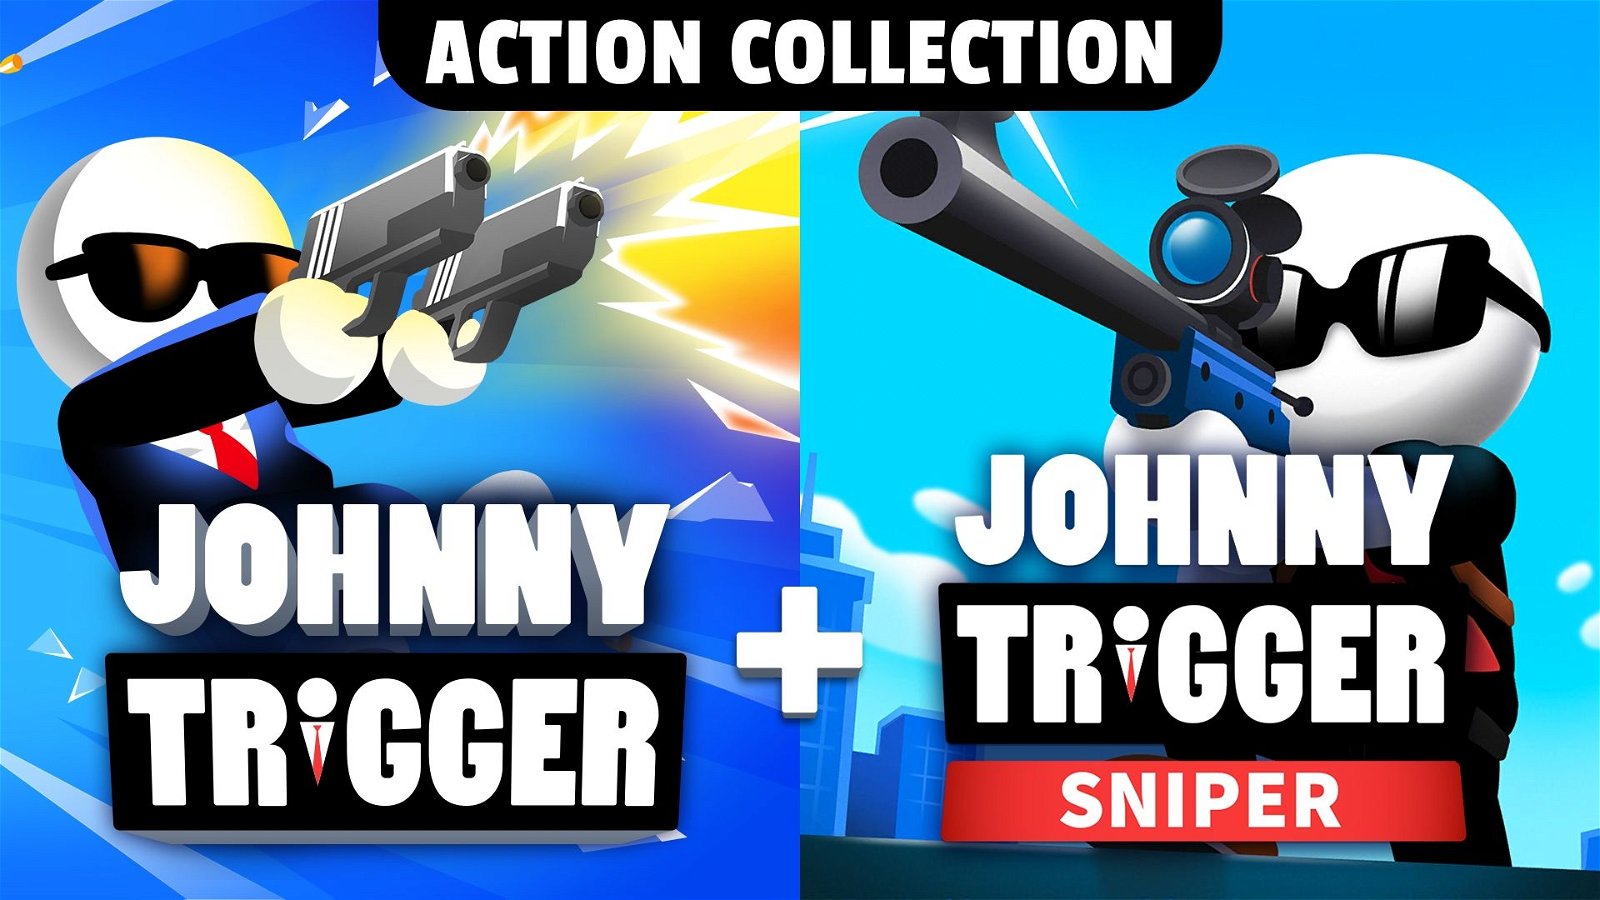 Image of Johnny Trigger Action Collection